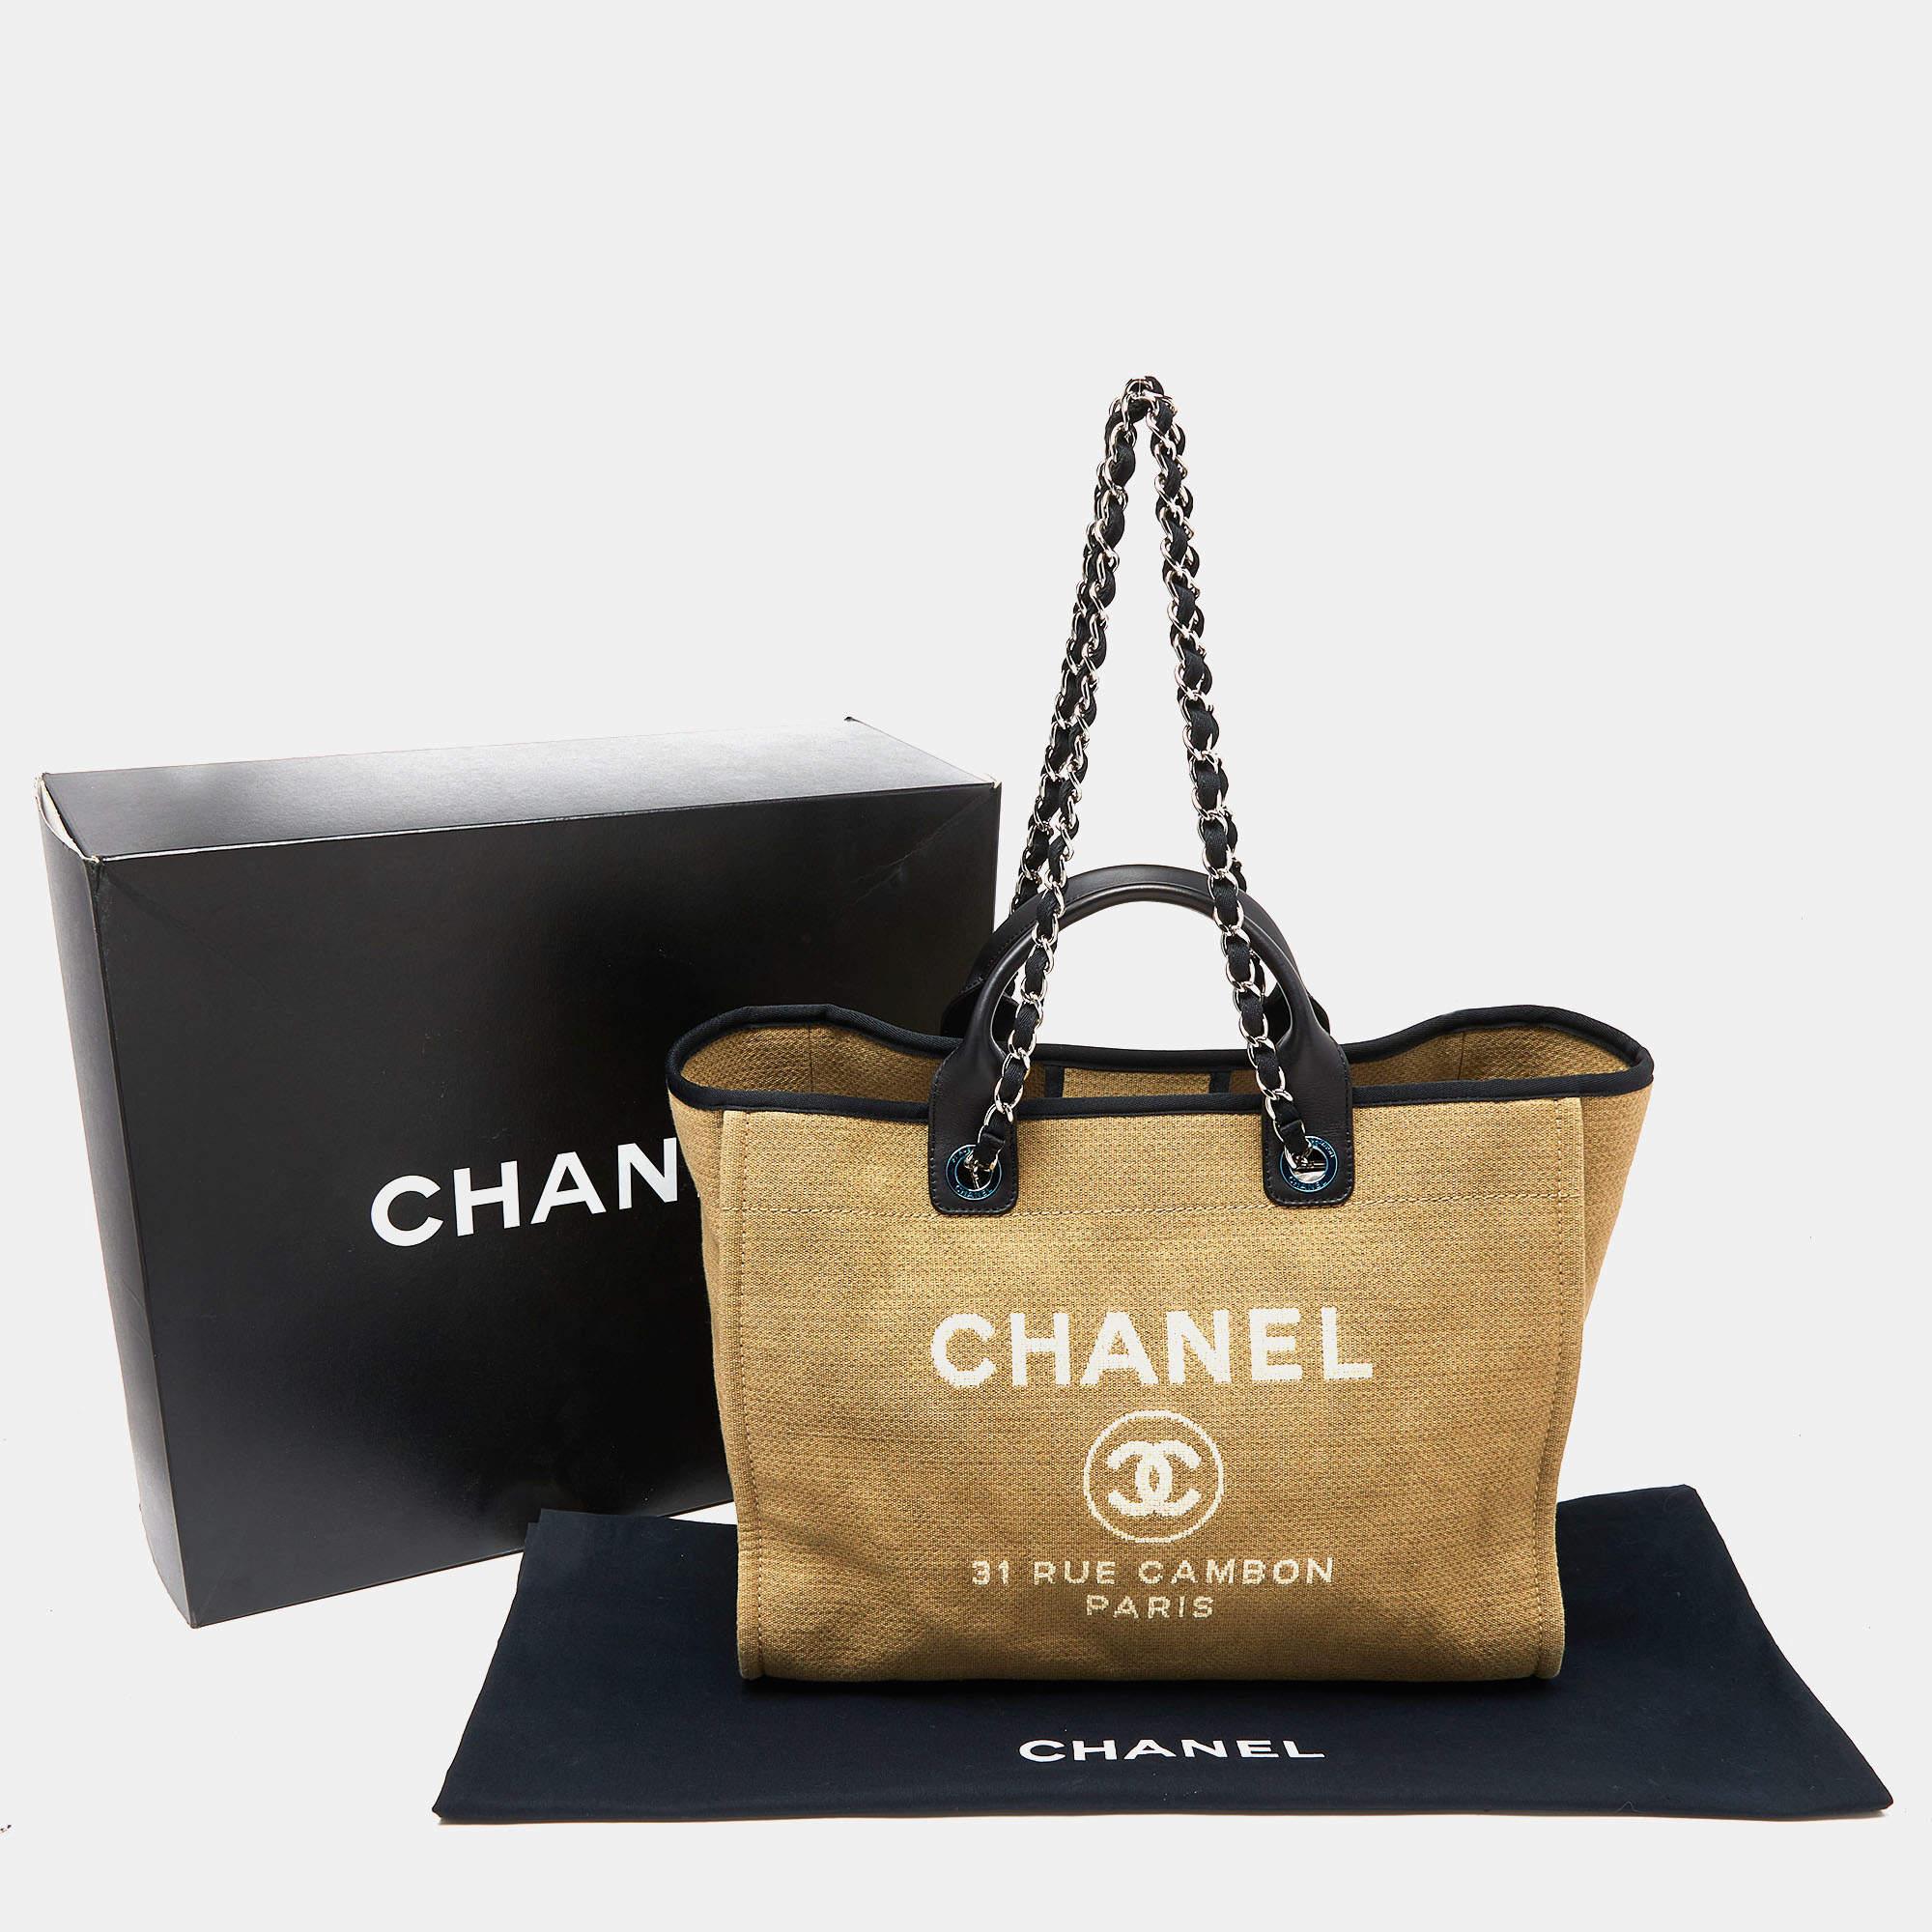 Chanel Beige/Black Canvas and Leather Large Deauville Shopper Tote 12